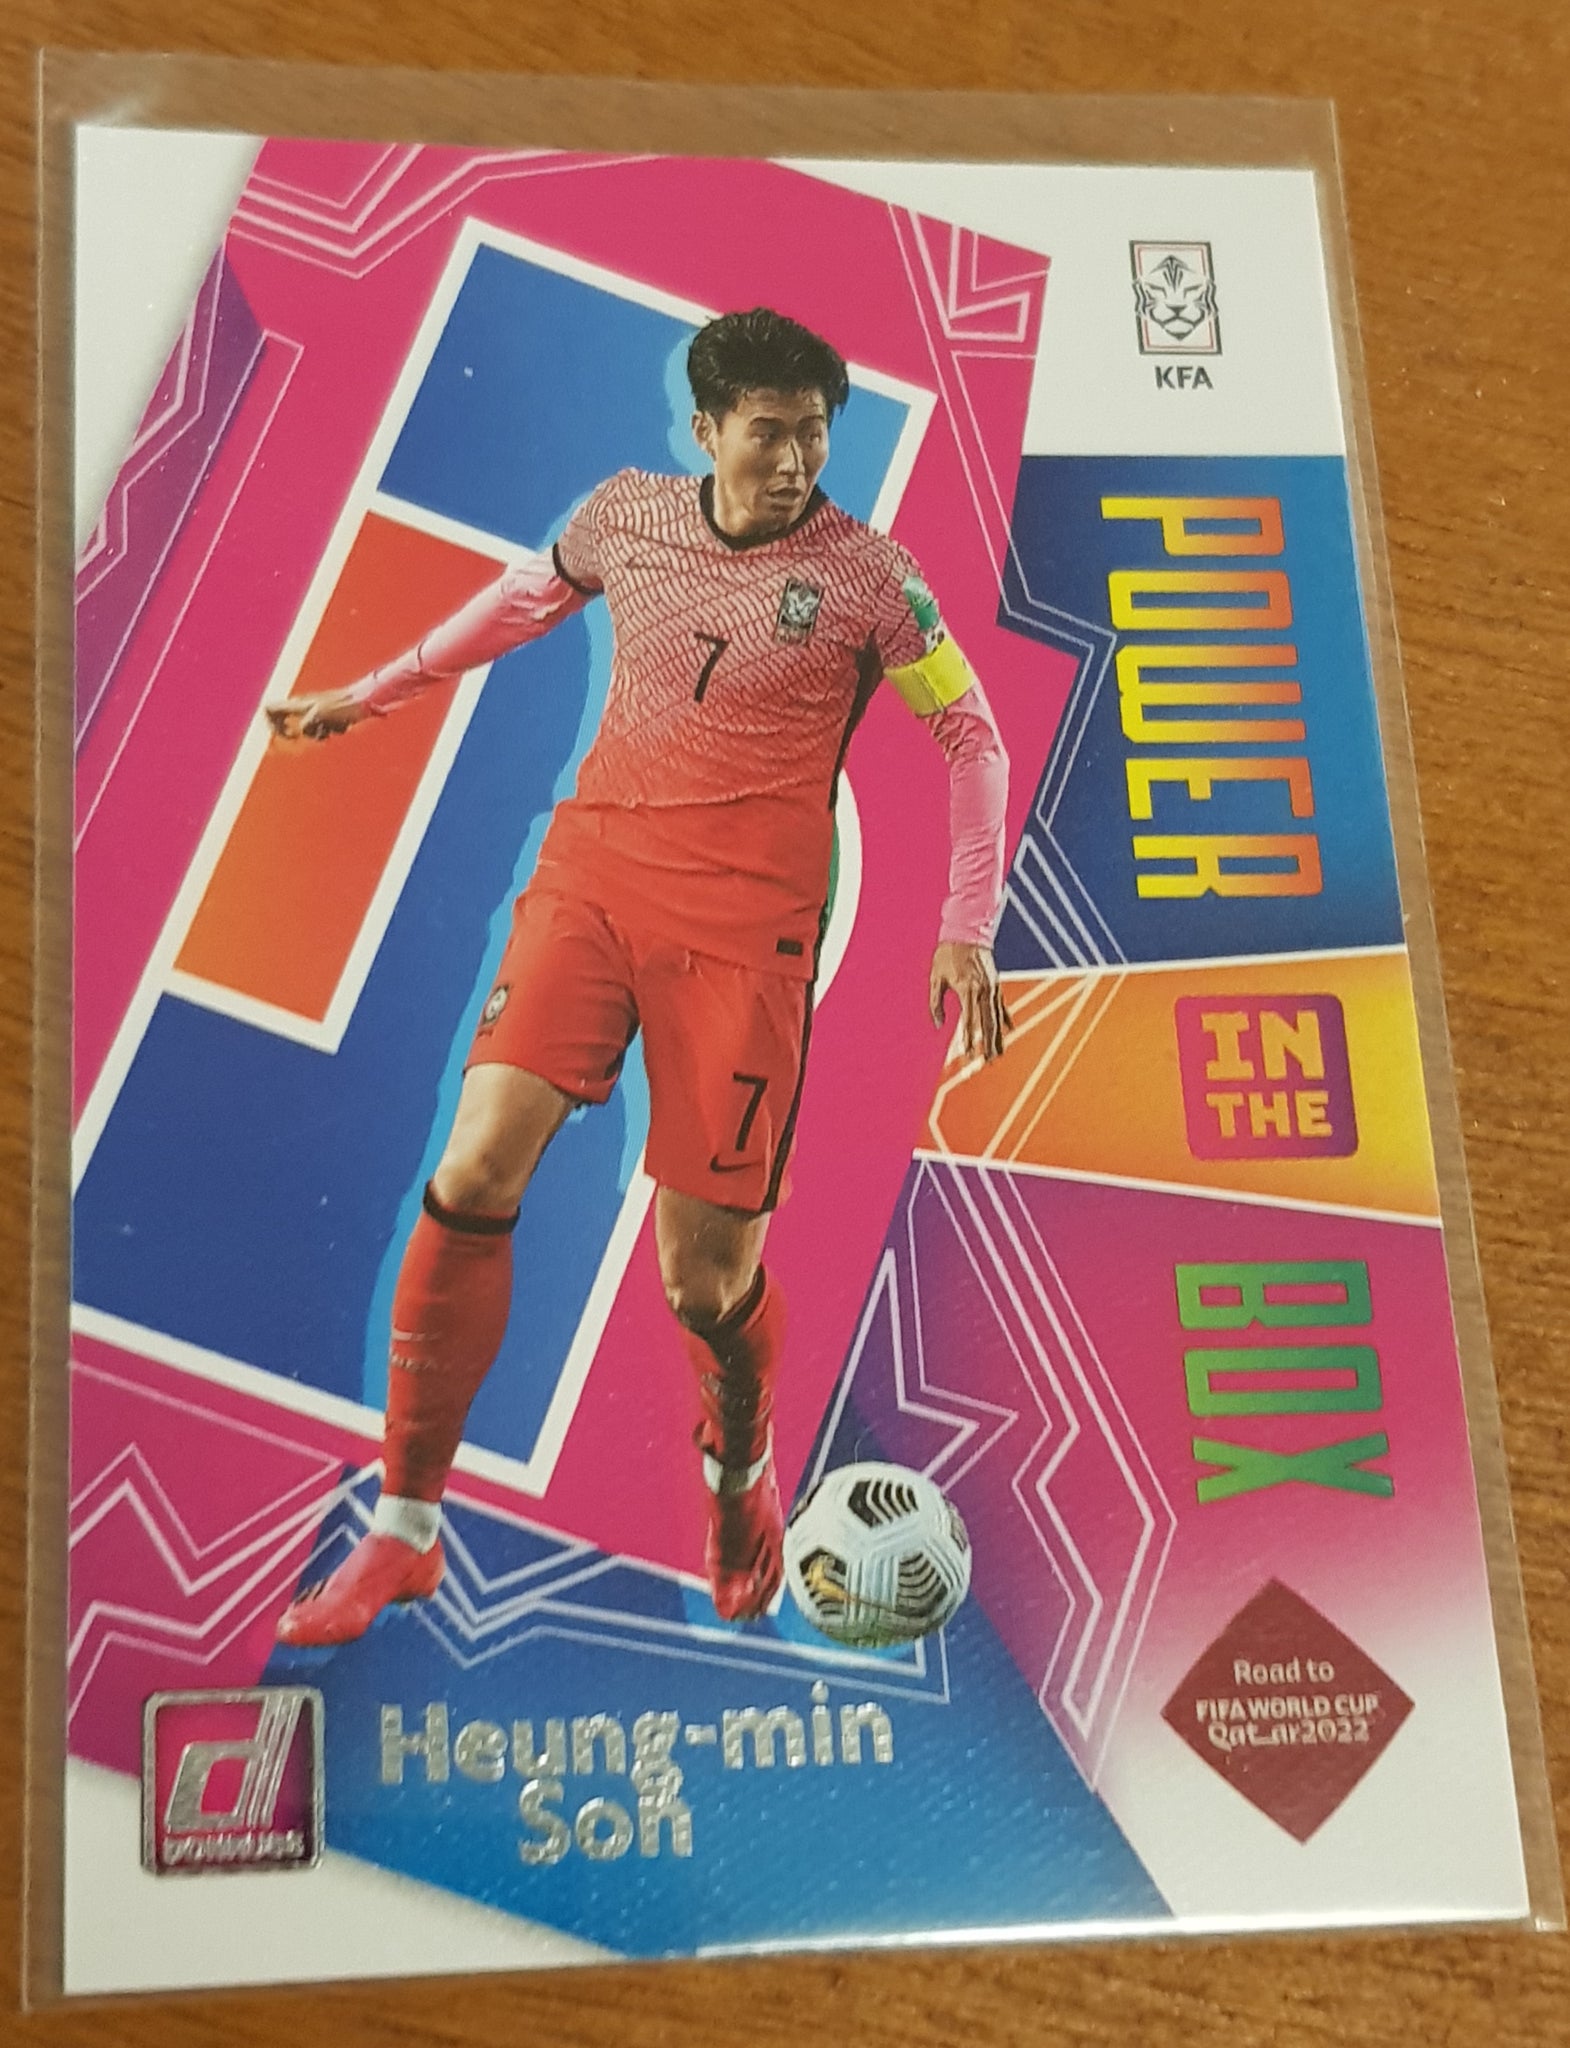 2022 Panini Road to Qatar Power in the Box Heung-min Son #17 Trading Card